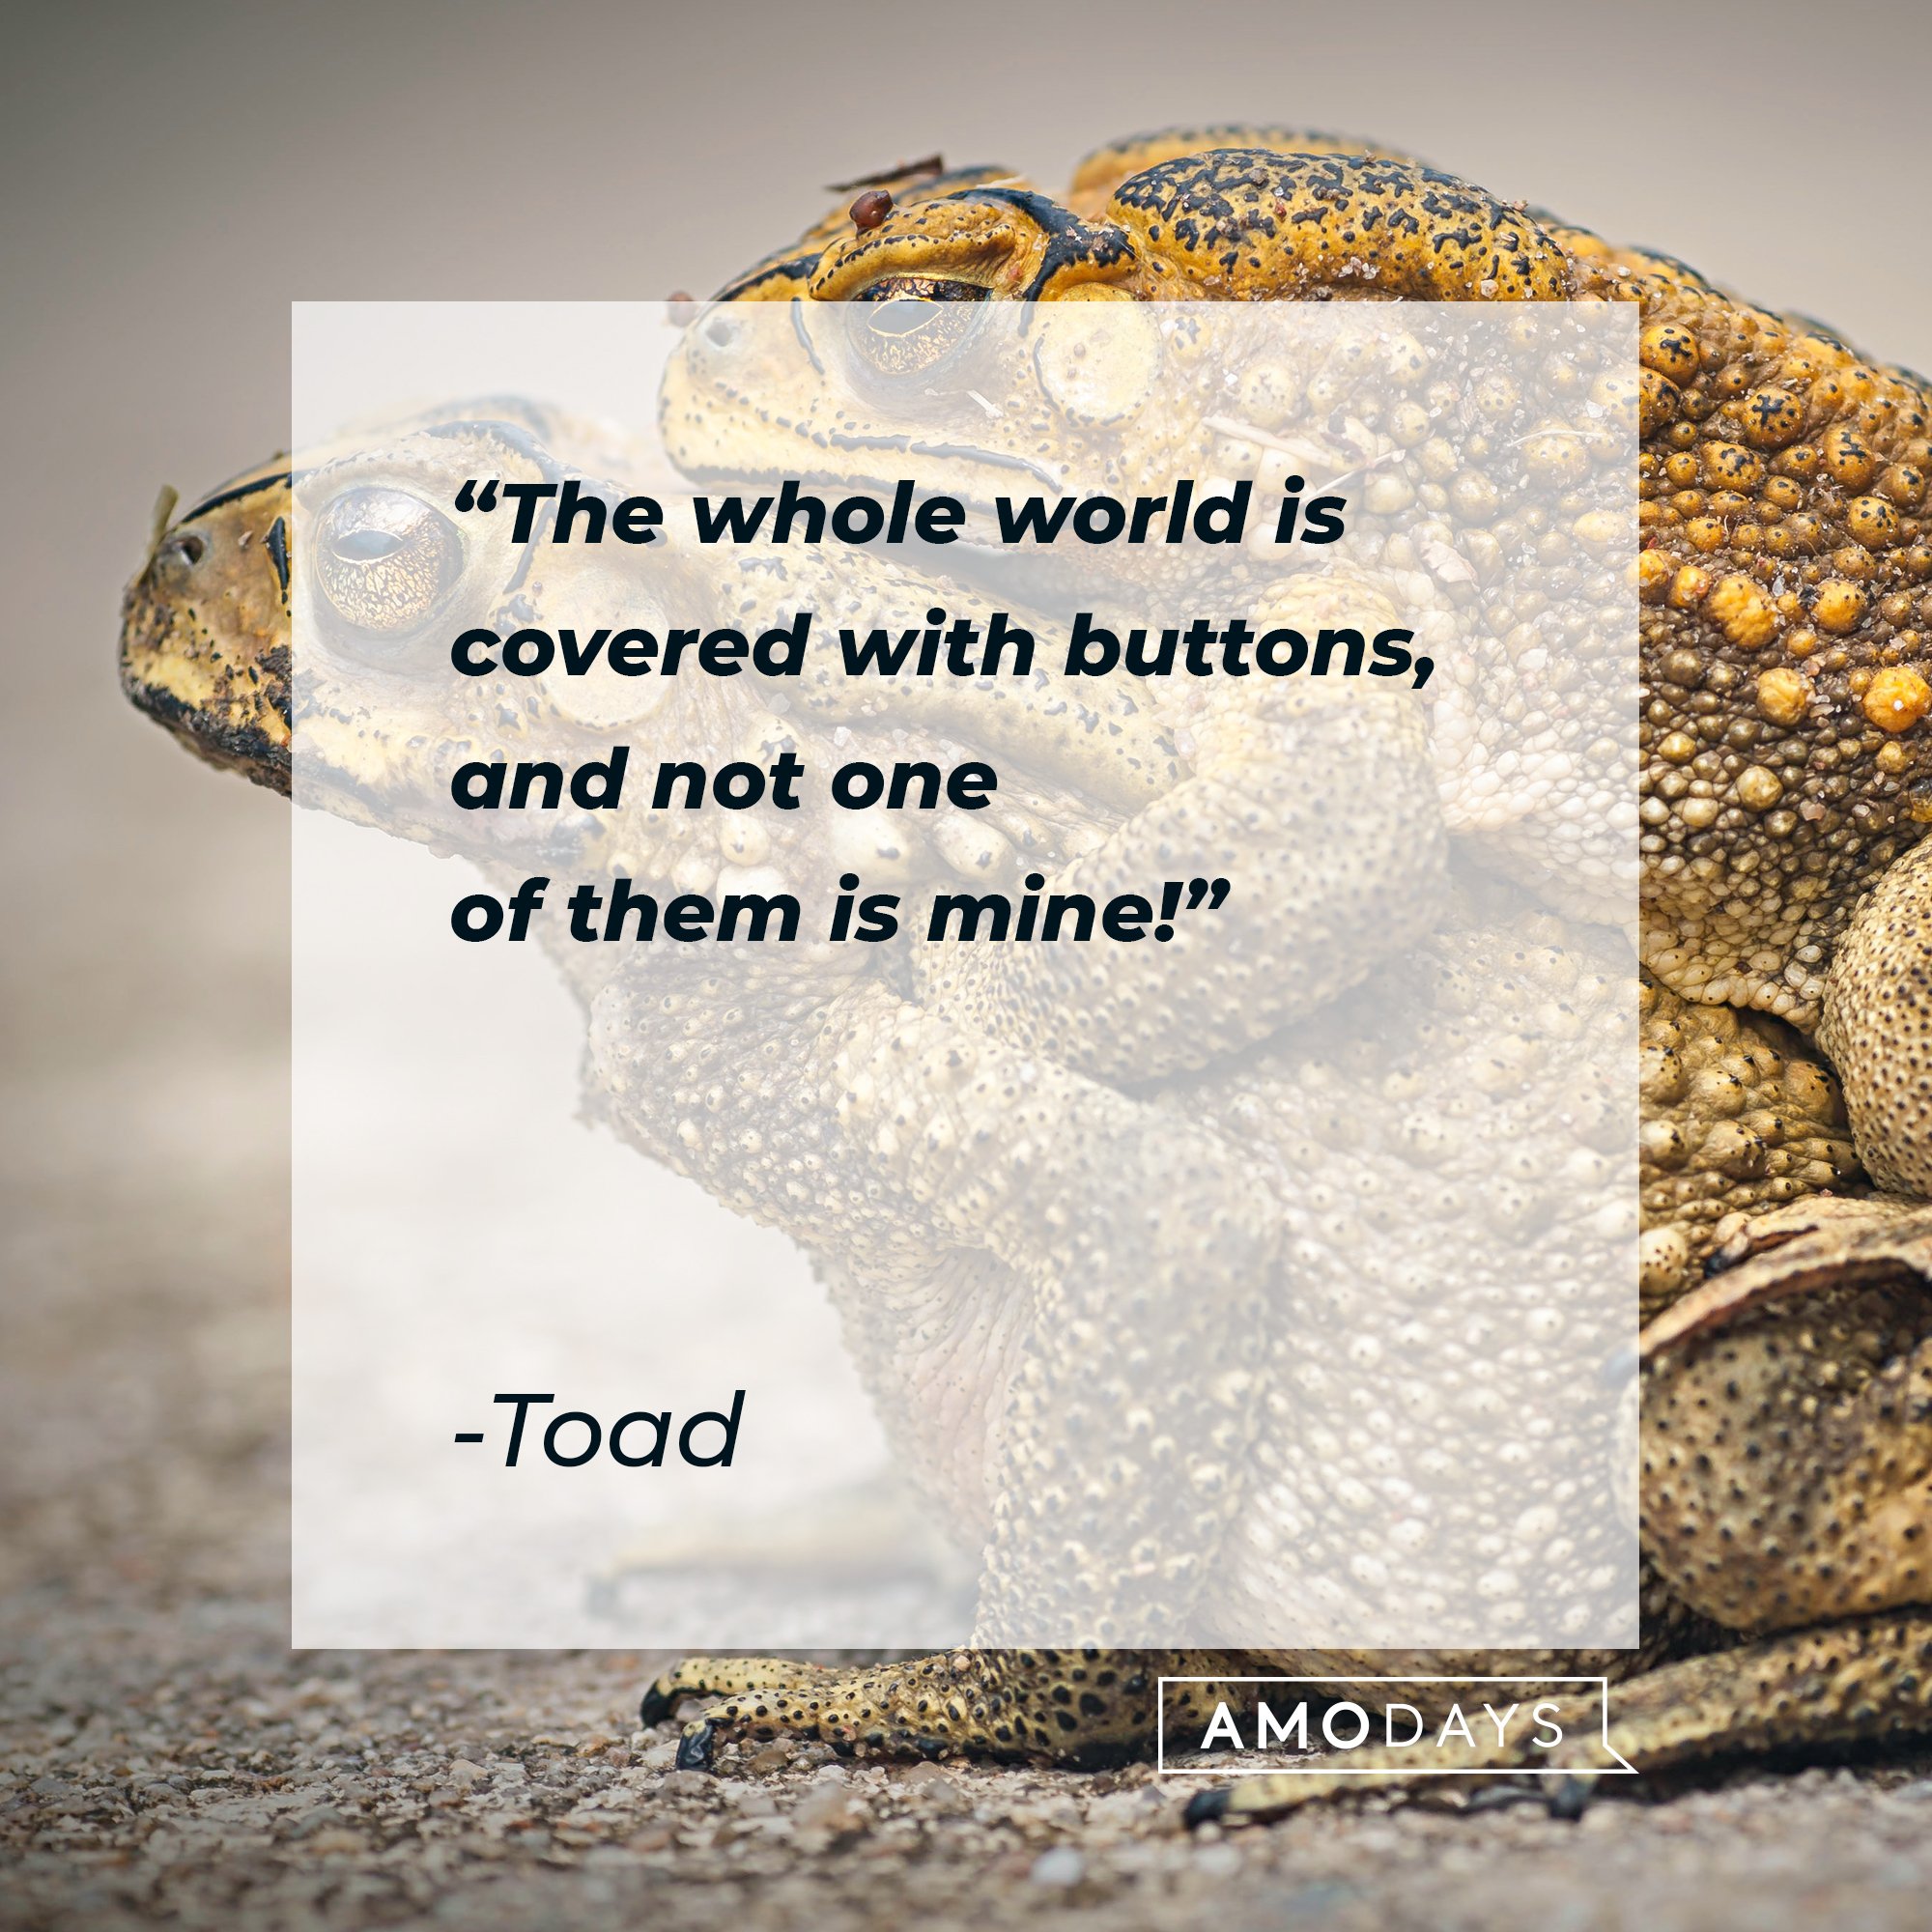  Toad's quote: "The whole world is covered with buttons, and not one of them is mine!" | Image: AmoDays